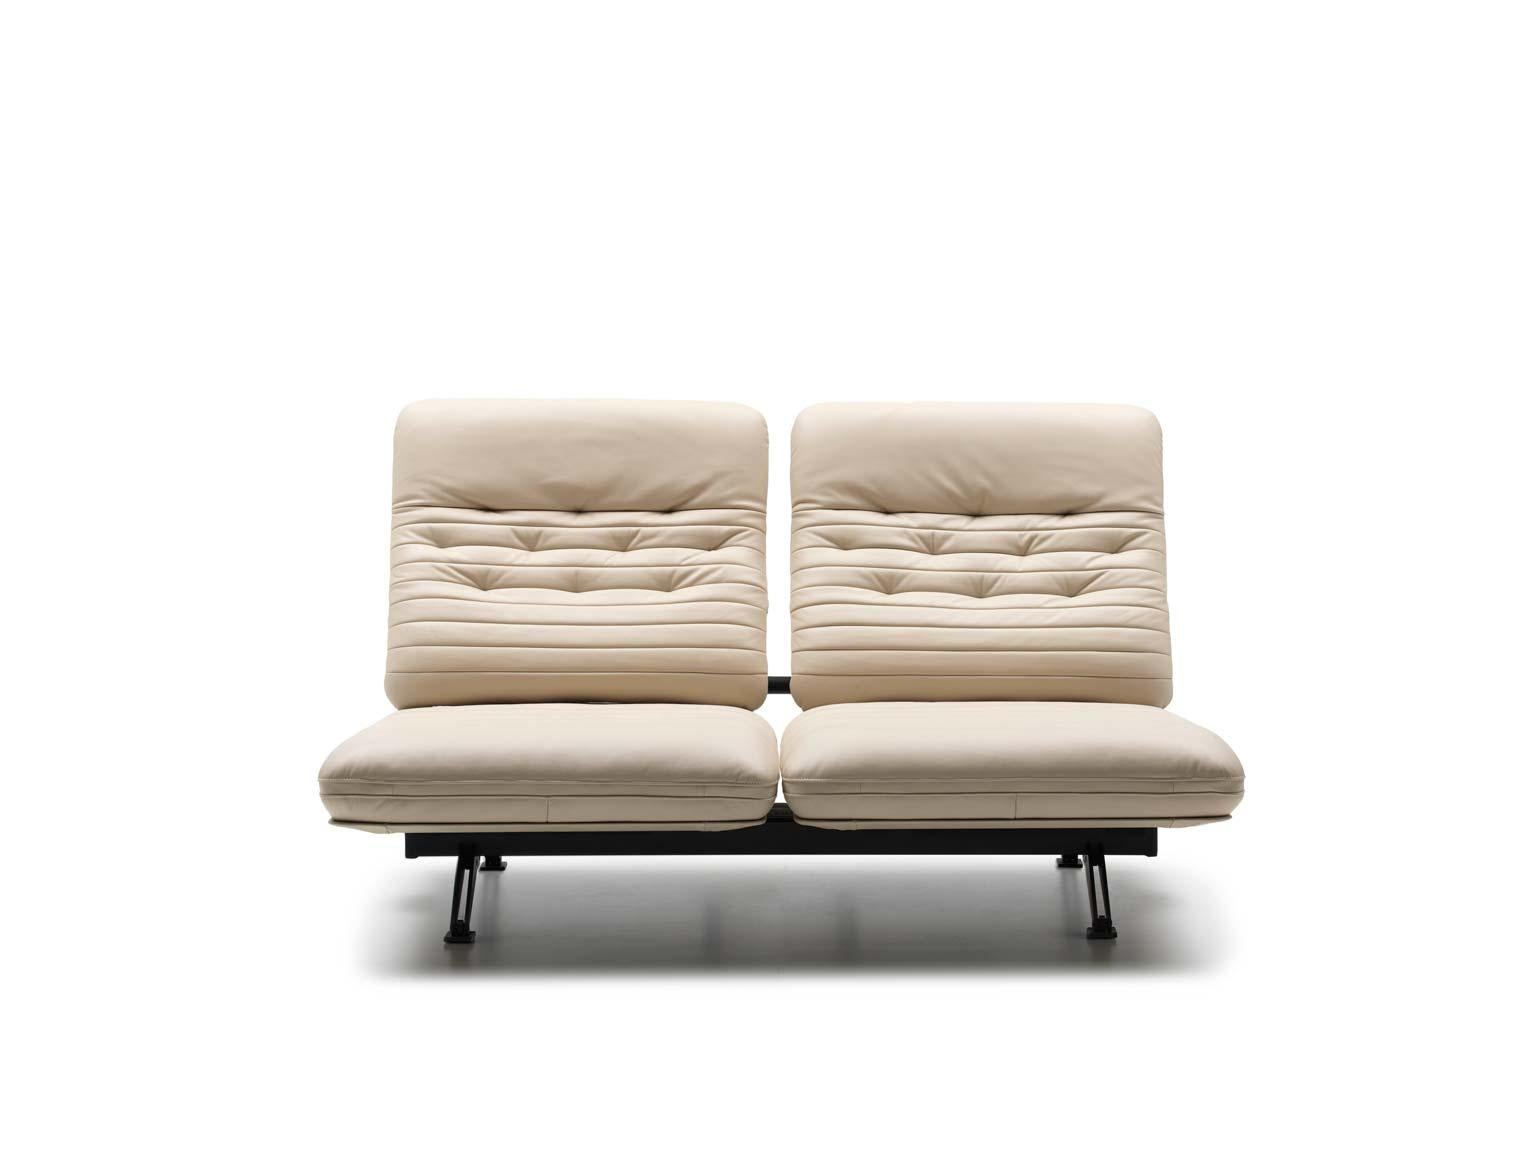 DS-490 Functional Sofa Cream White Leather with Side Table & Cushions by De Sede 7